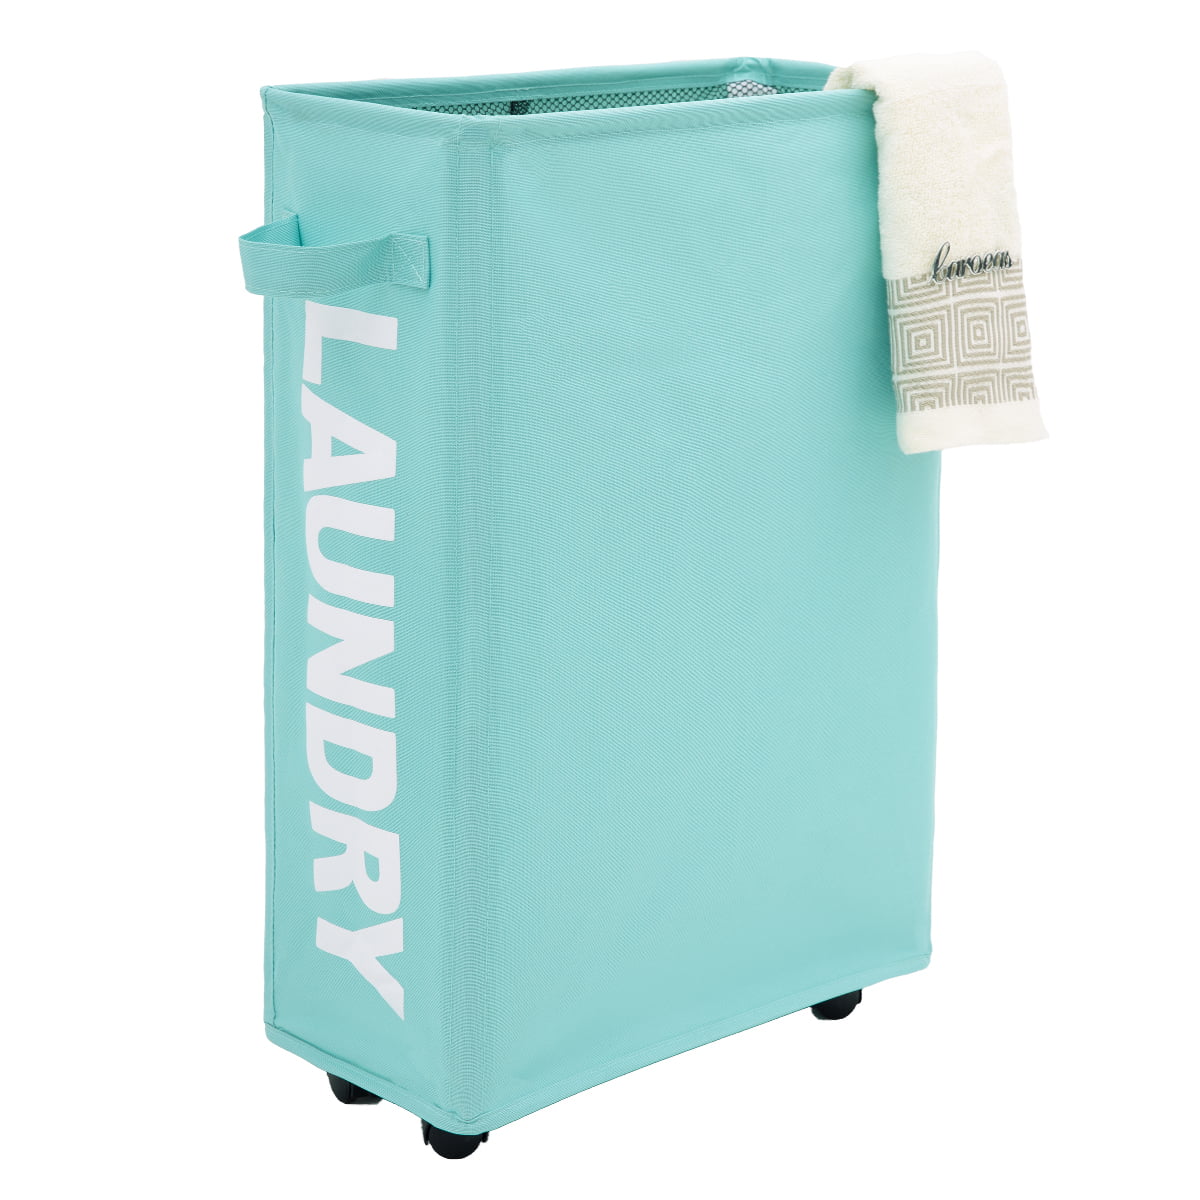 Tall Laundry Hamper Stand-Well Holds Heavy Loads with Ease – Caroeas